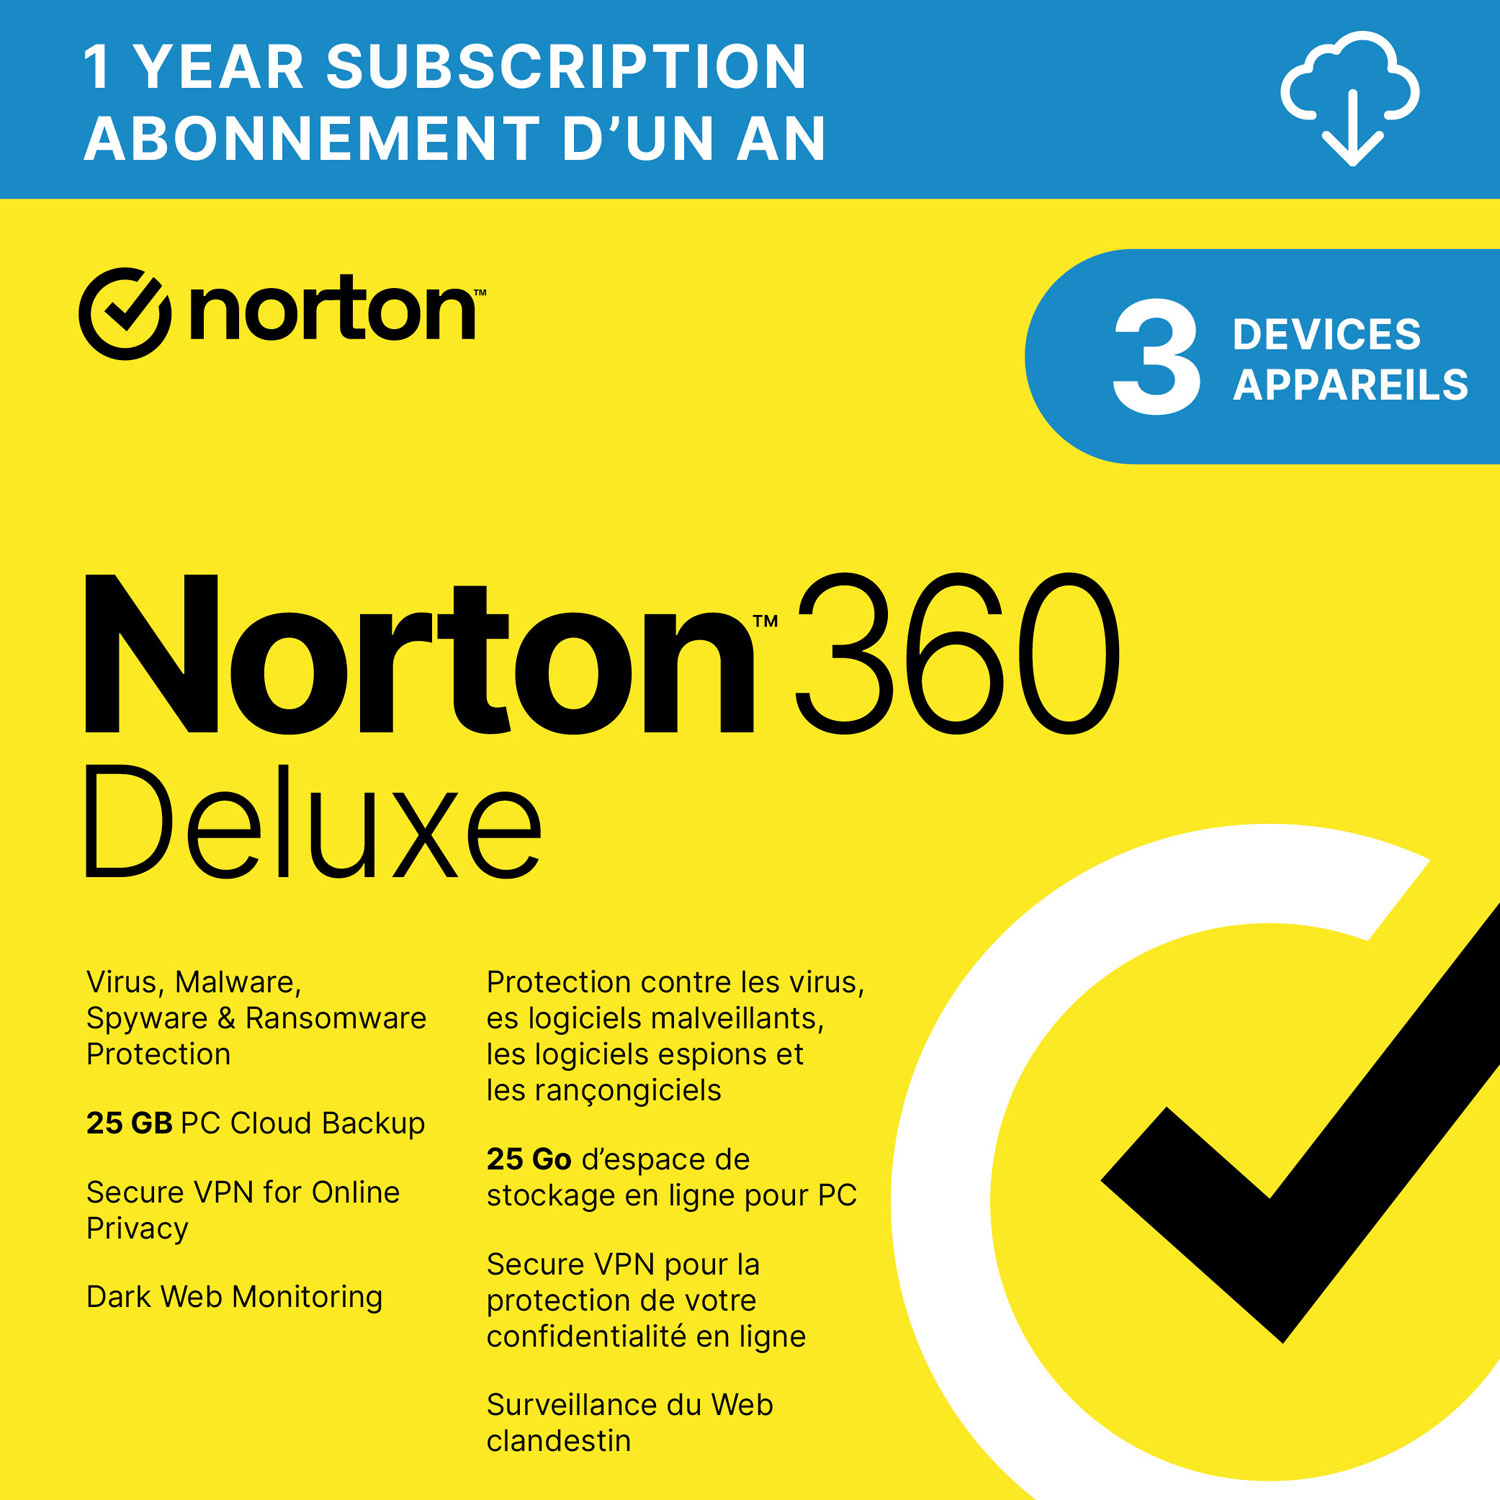 Norton 360 Deluxe (PC/Mac) - 3 Devices - 25GB Cloud Backup - 1-Year Subscription - Digital Download